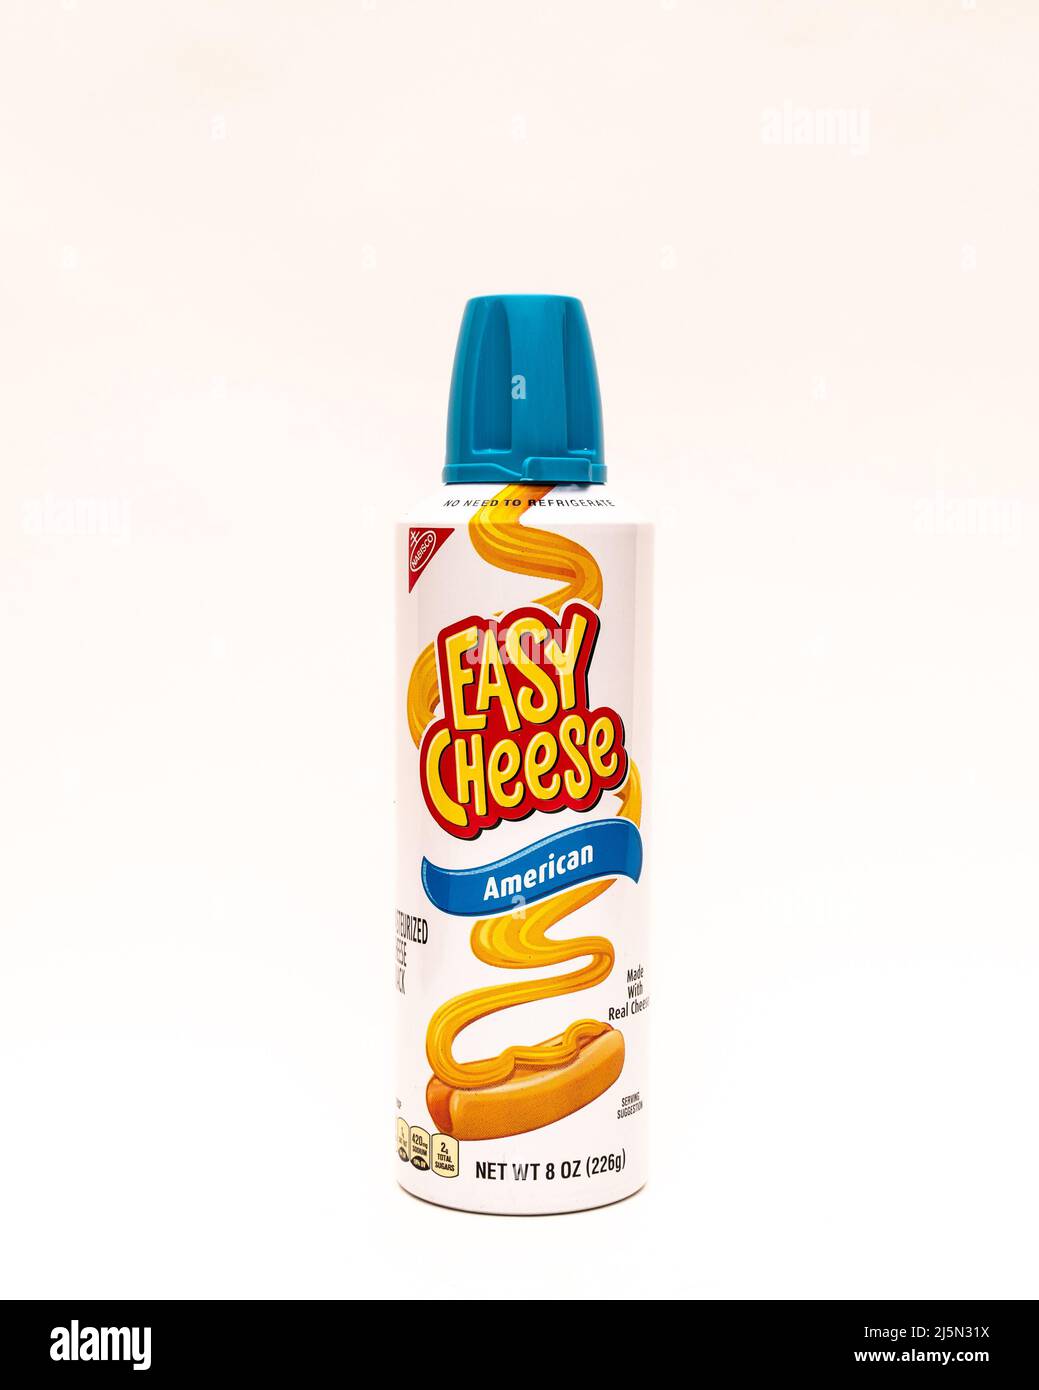 A pressurized can or American flavor Easy Cheese, just squirt it onto a cracker for an instant delicious snack. Stock Photo